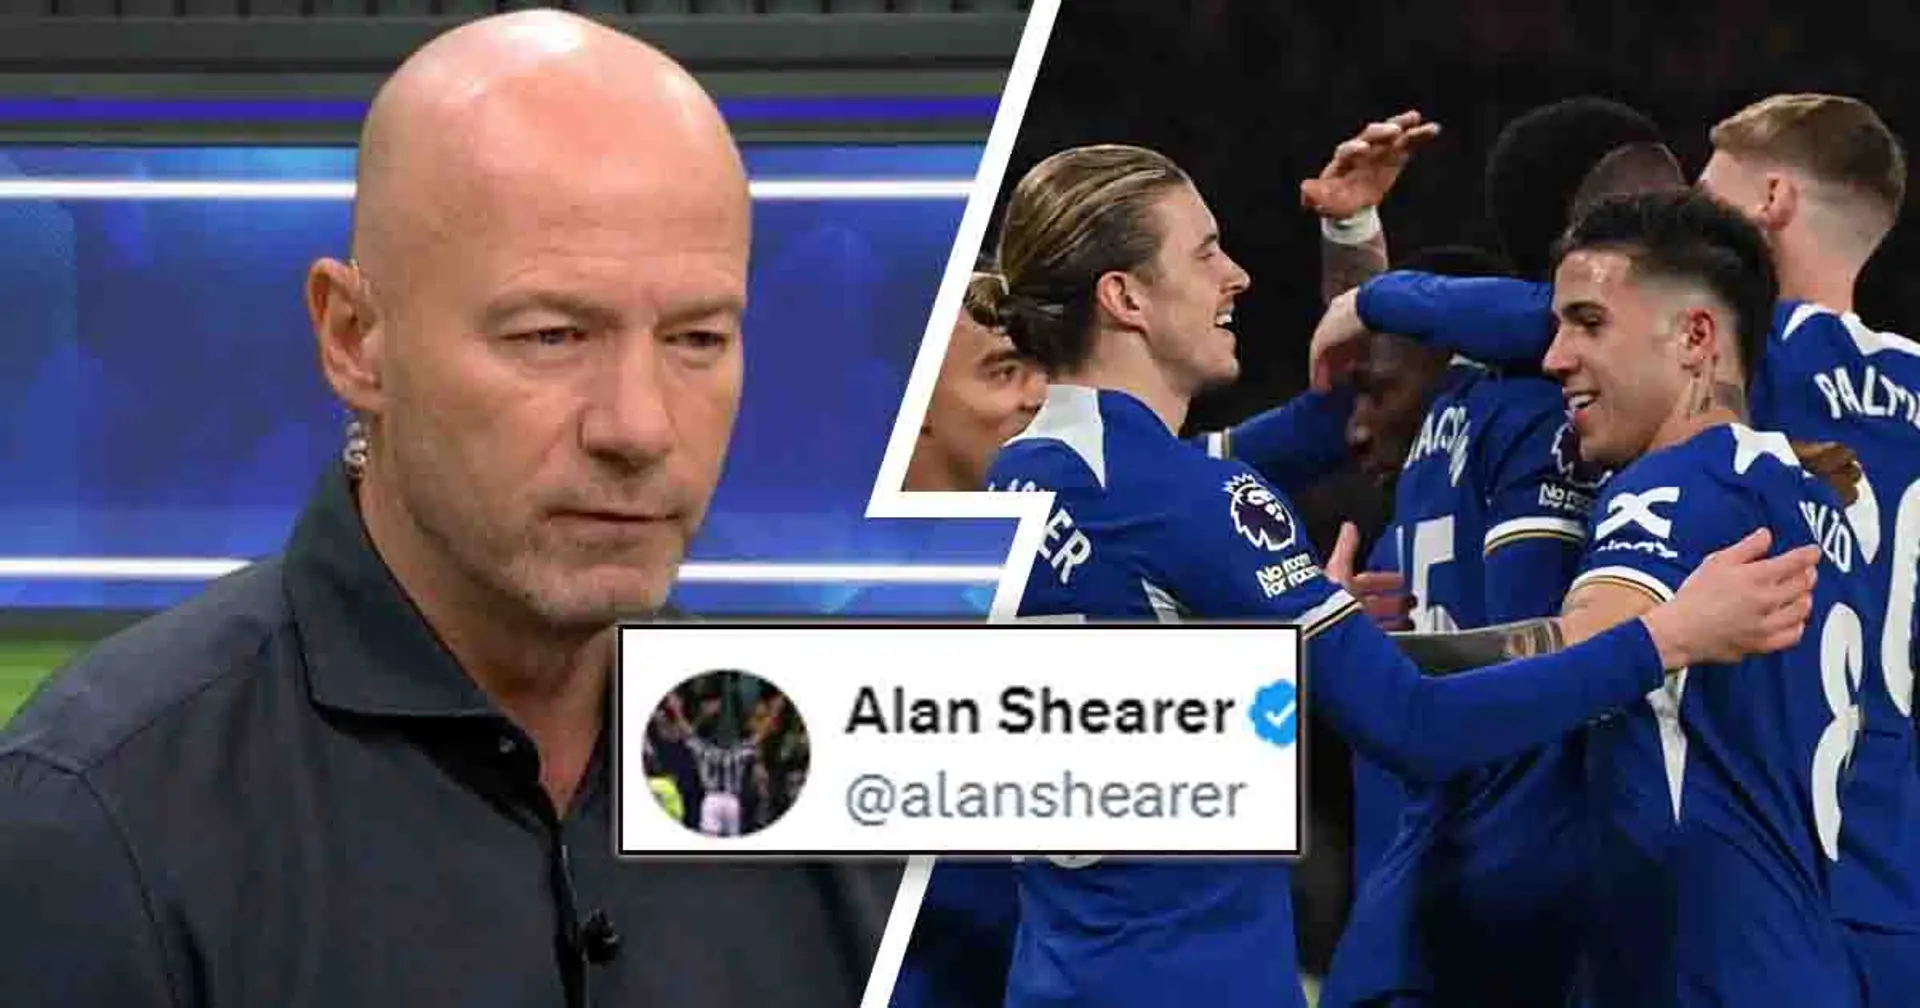 'Newcastle must be awful then': Chelsea fans rage at Alan Shearer's 'average at best' comment